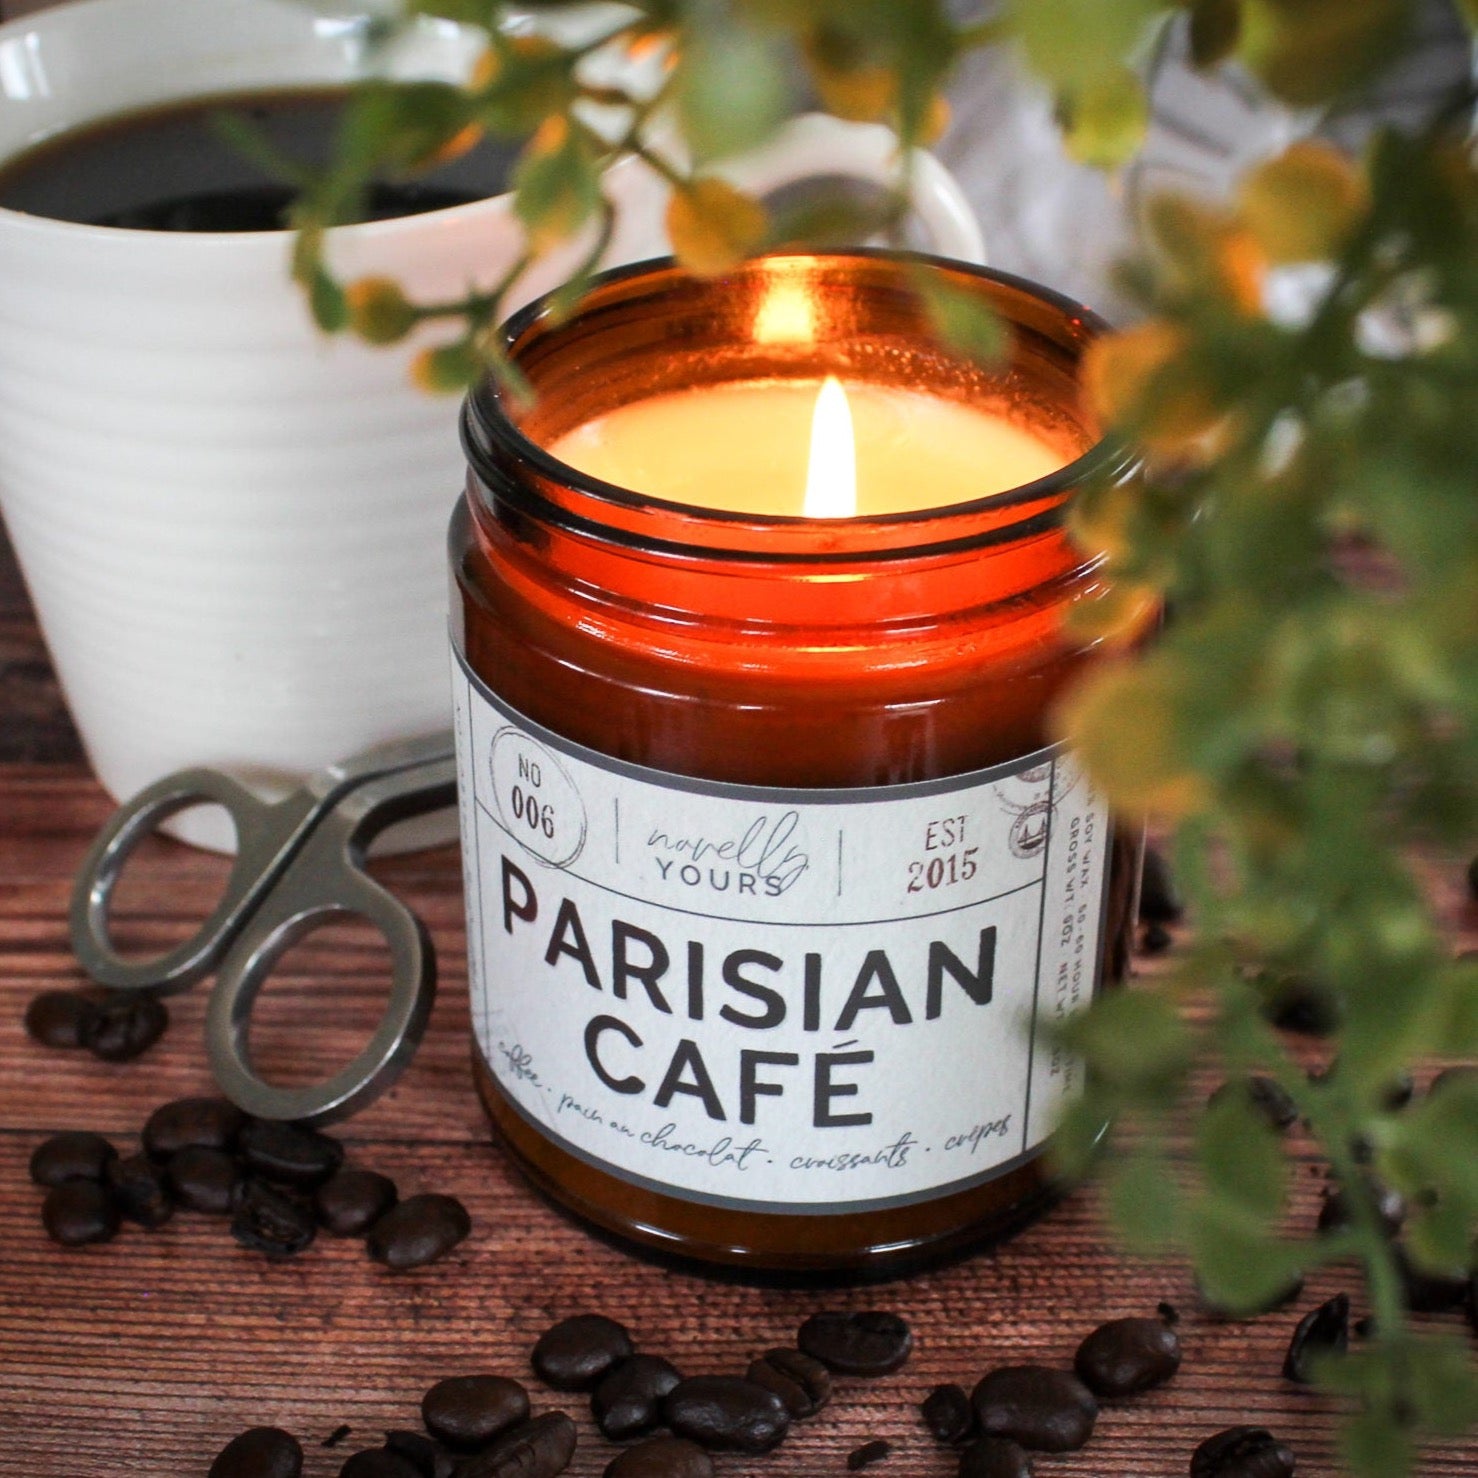 scented soy wax candle in amber jar, lit, surrounded by coffee beans reading "Parisian cafe"